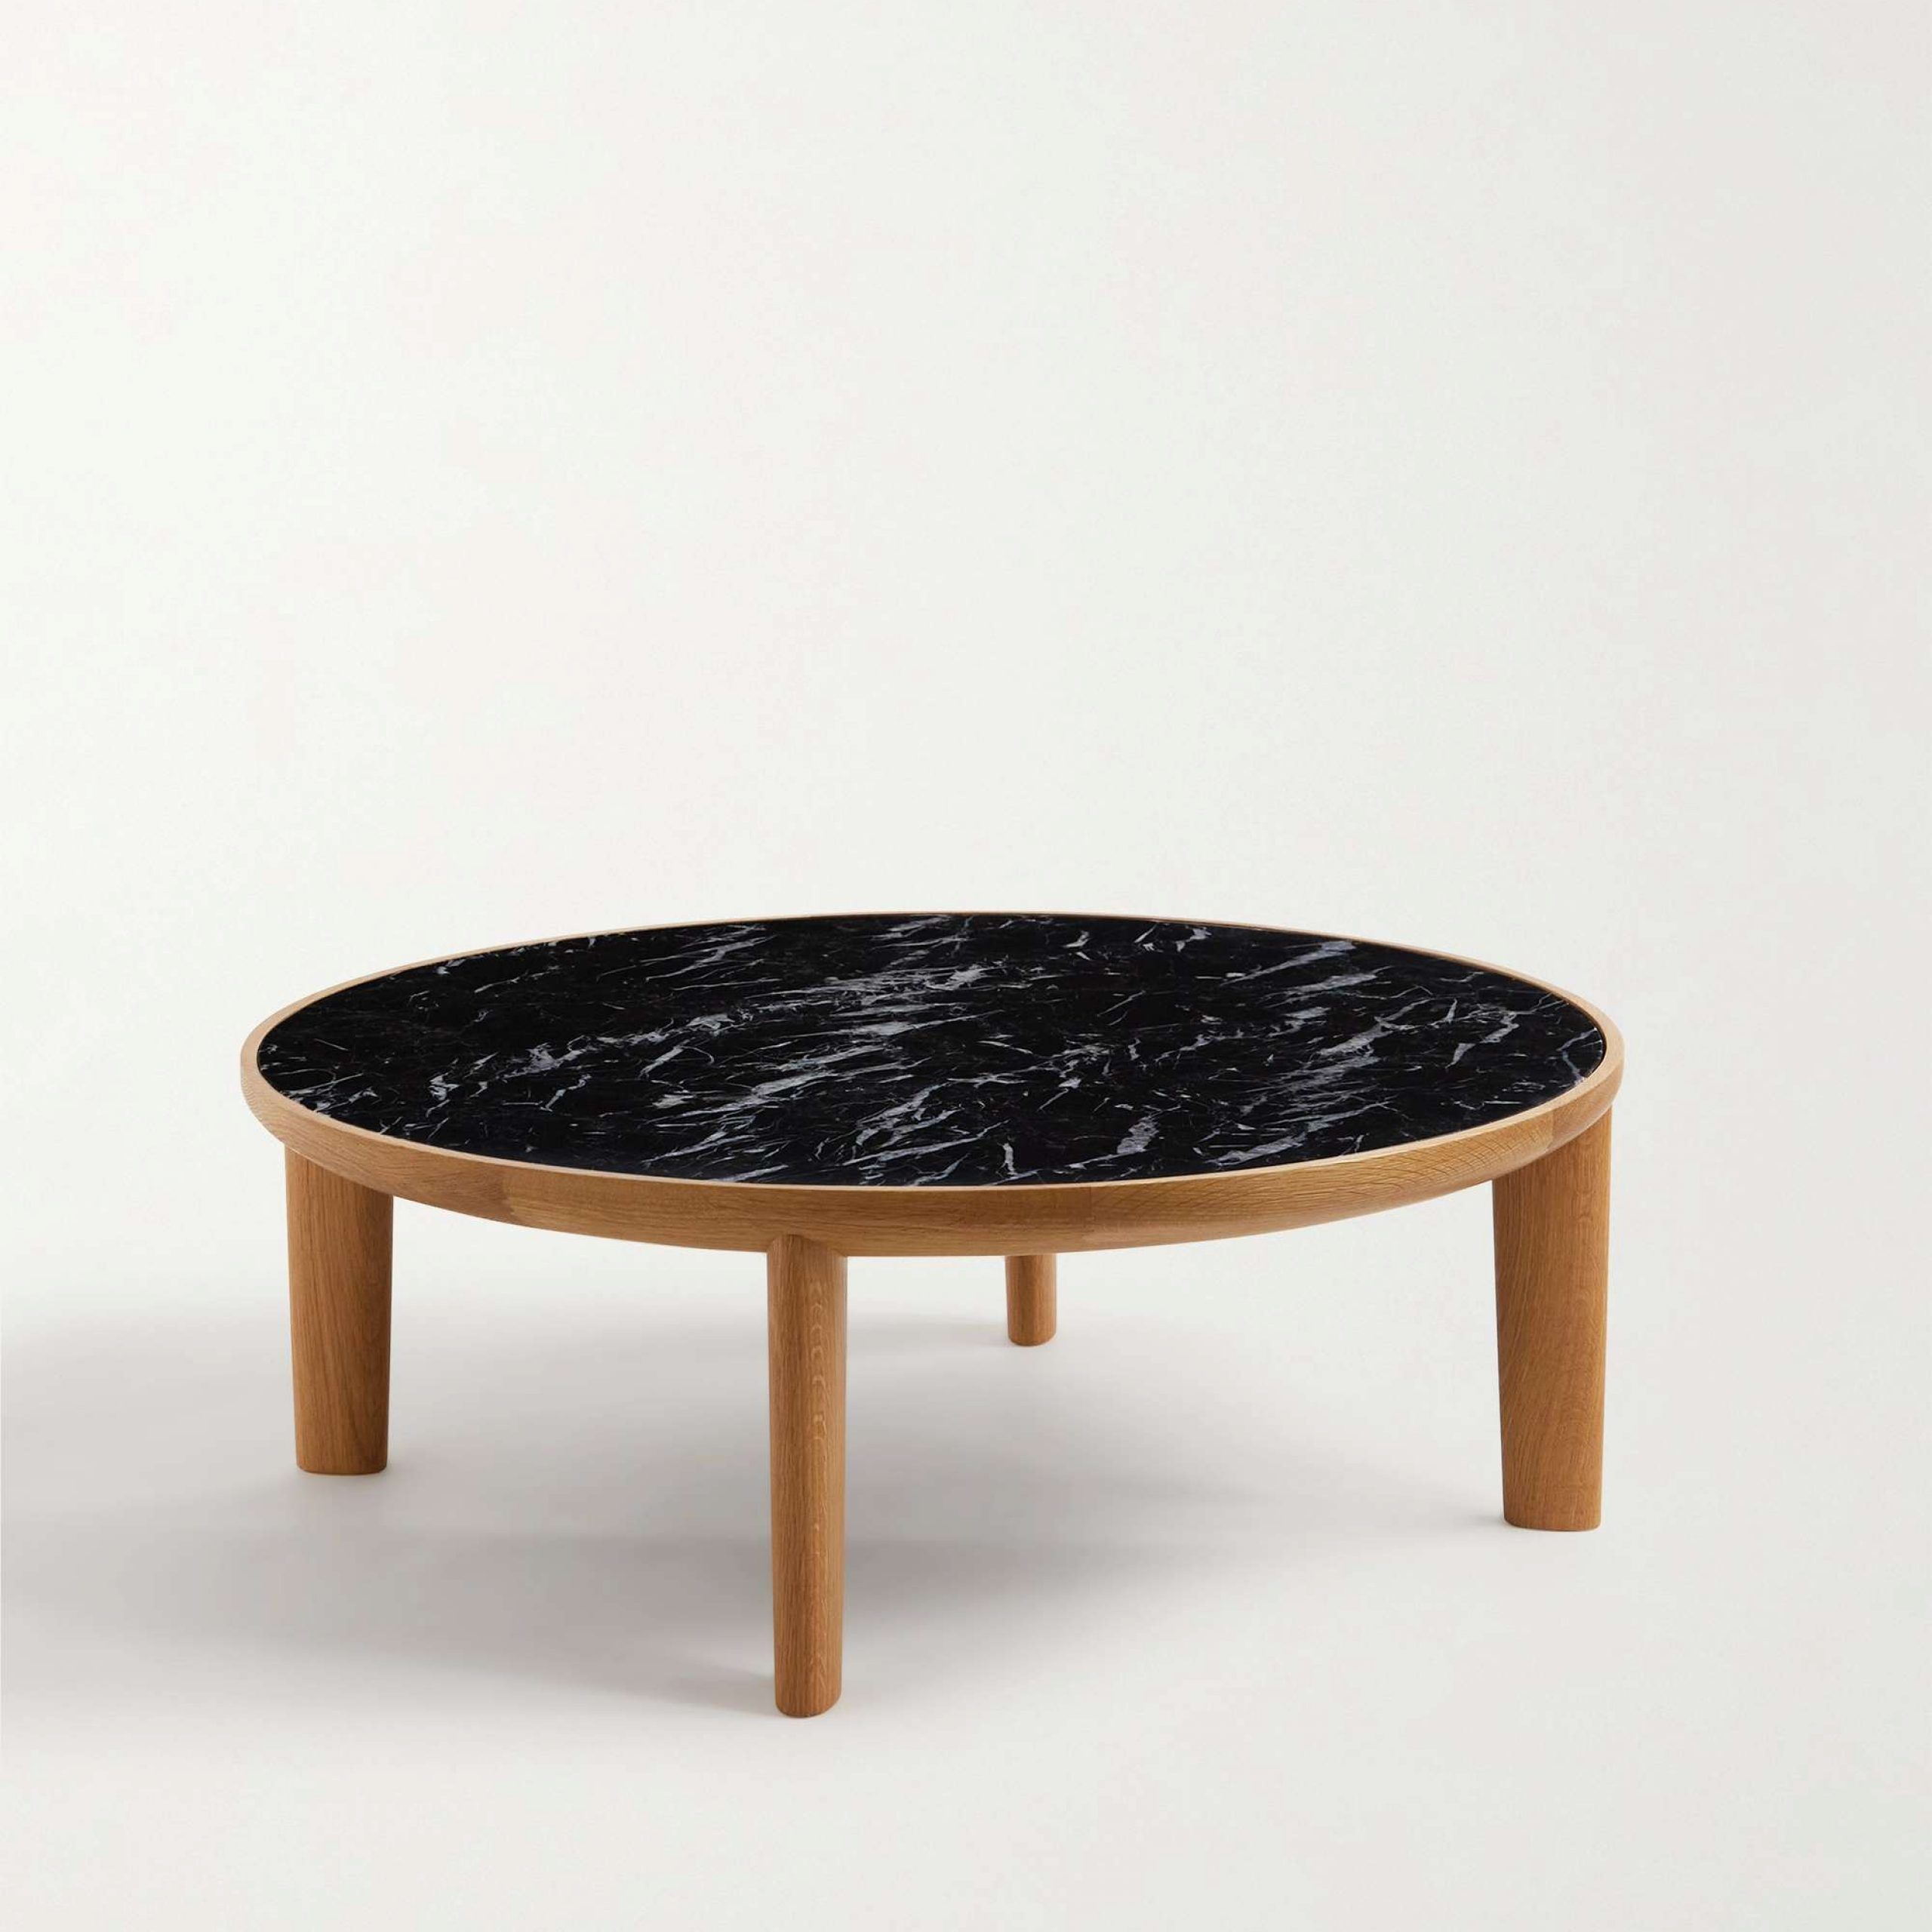 Black Hole Oak And Marble Coffee Table | The Conran Shop | Mr Porter In Marble Coffee Tables (View 6 of 20)